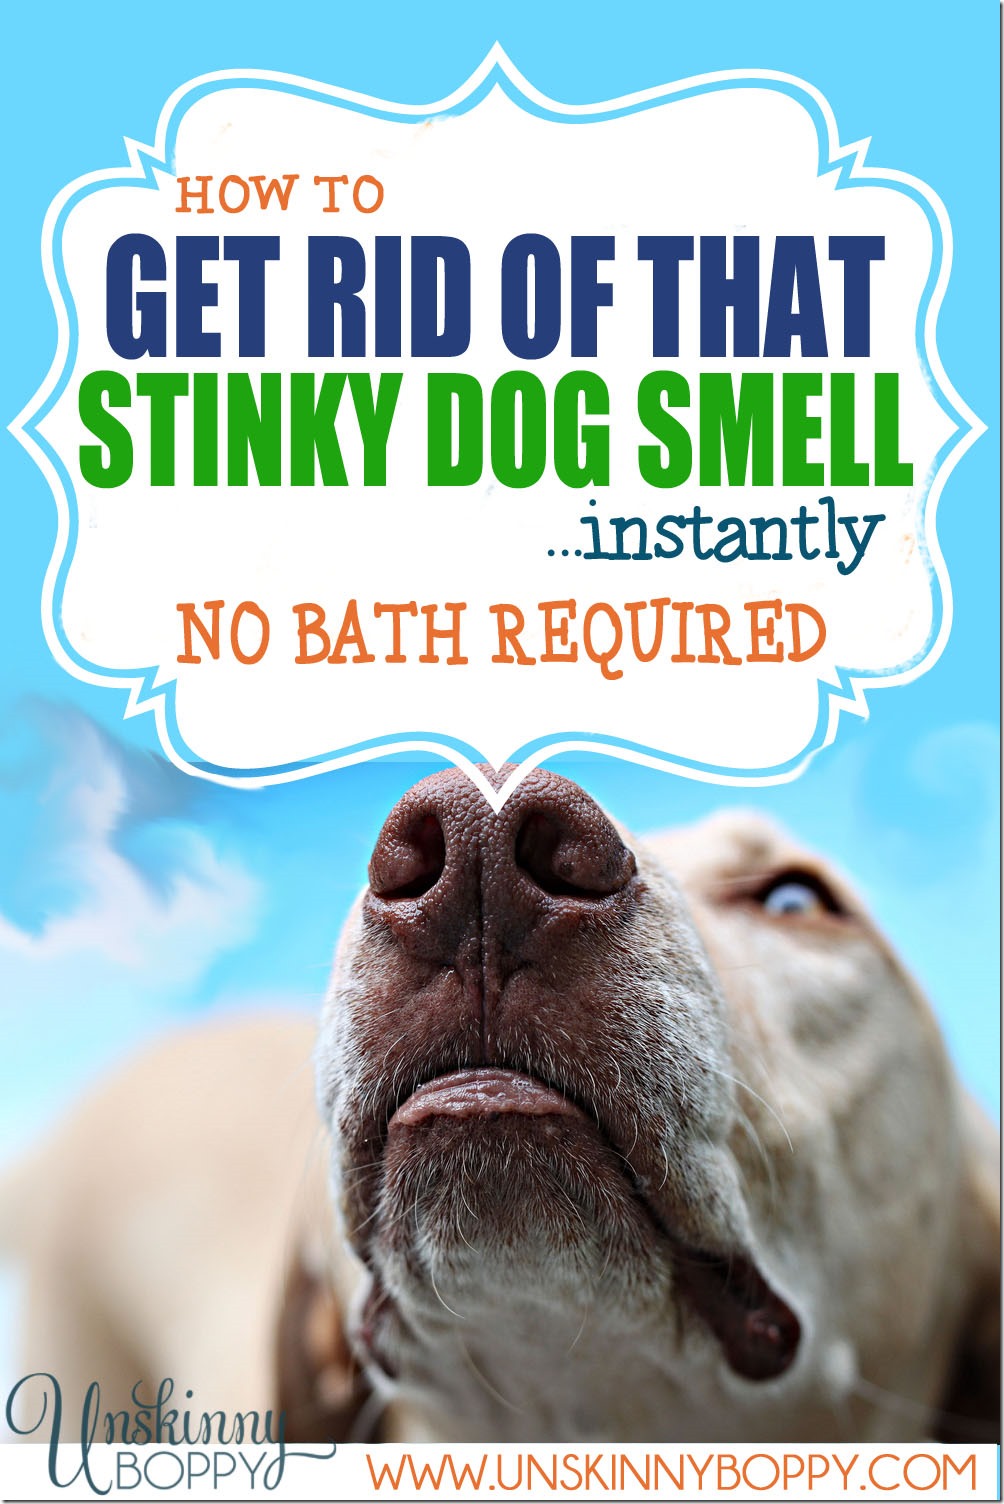 How to get rid of stinky dog smell - no bath necessary!